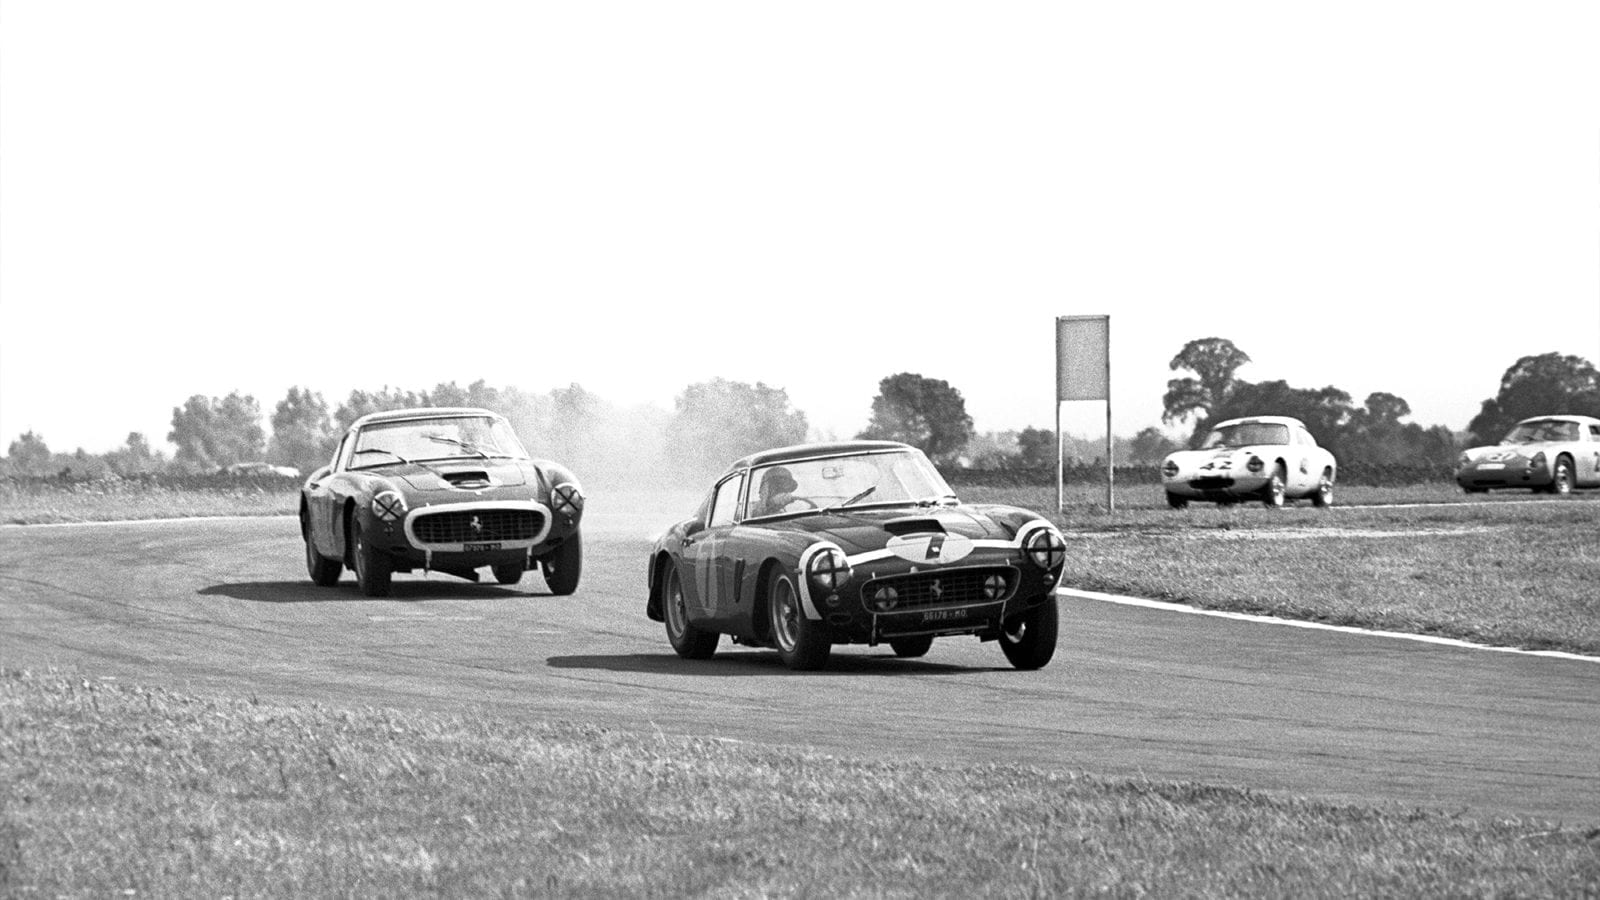 Stirling Moss in a Ferrari 250 GT SWB leads Mike Parkes in the 1961 Tourist Trophy at Goodwood